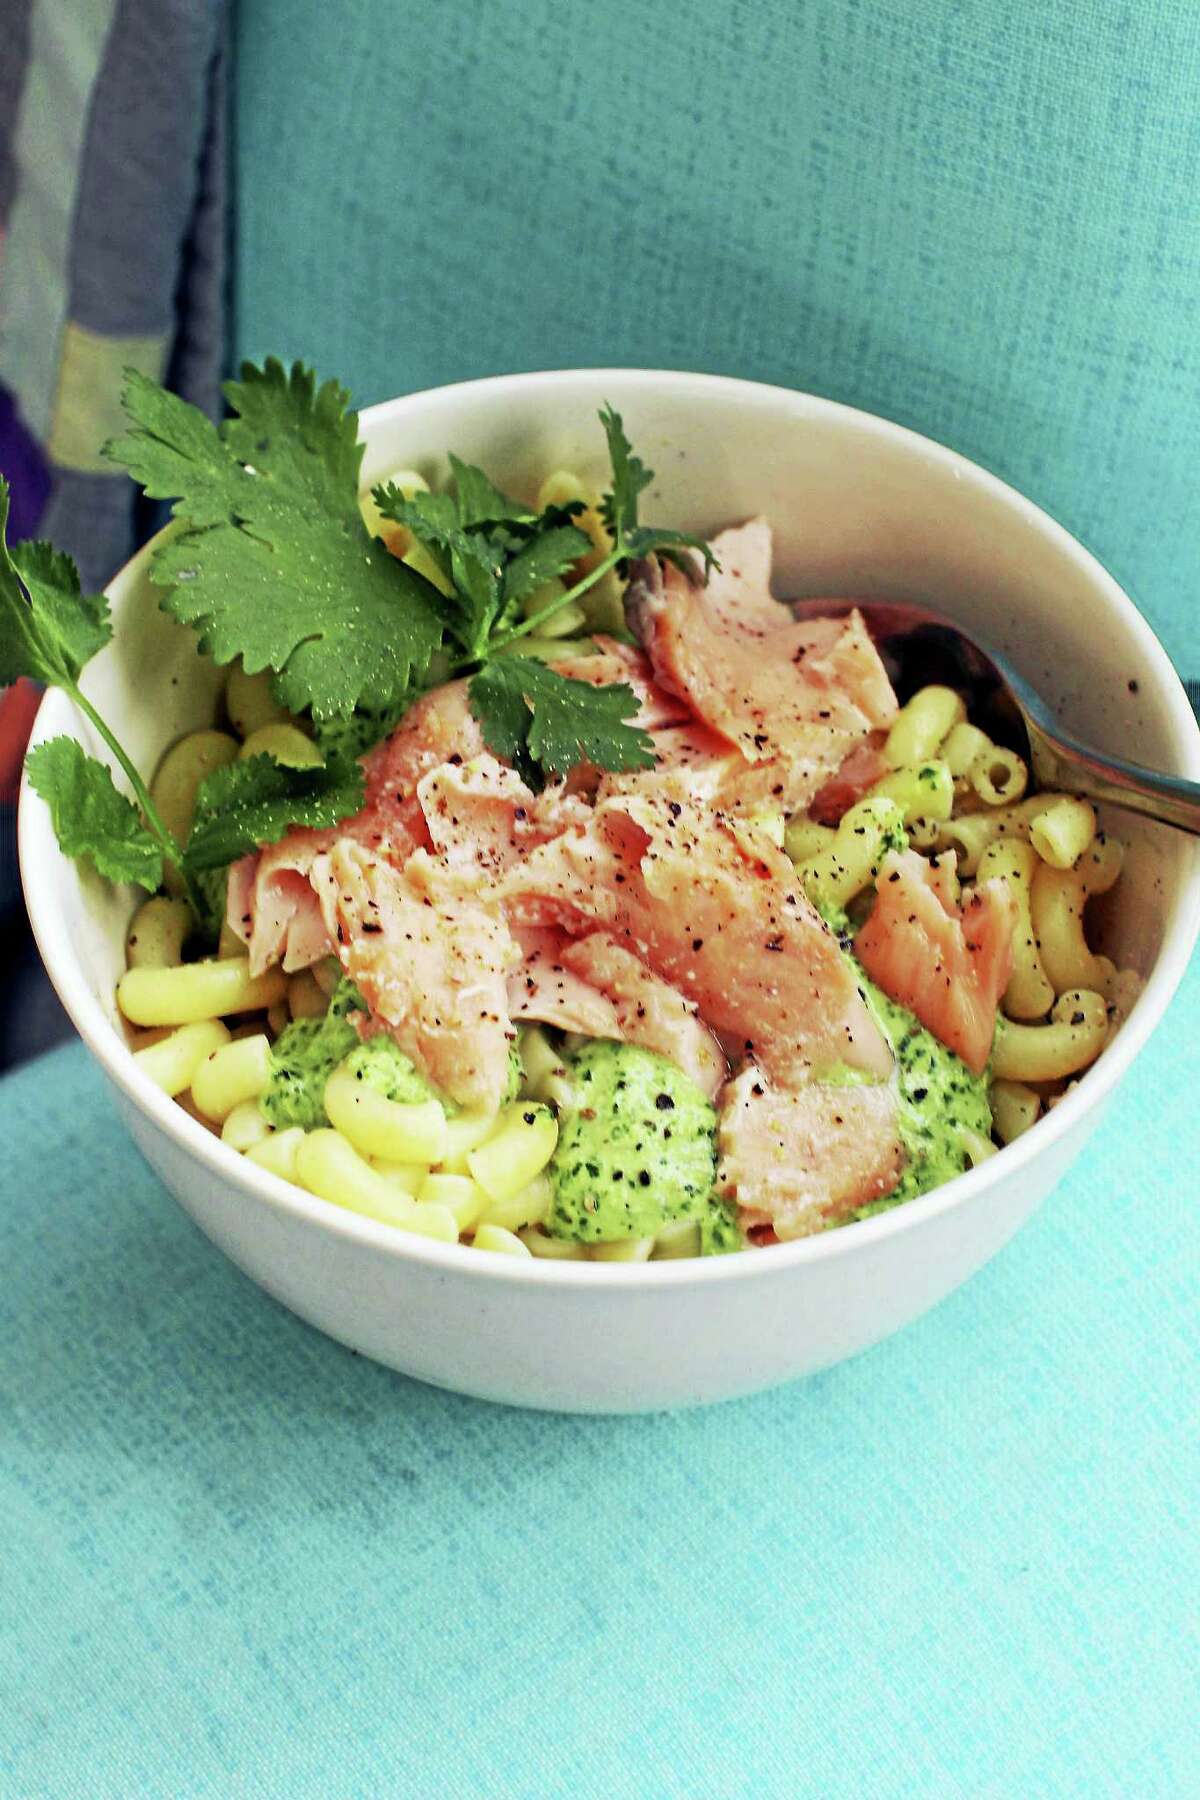 This delicious spring dish is easy to assemble and travels well, making it perfect for packed lunches and picnics. It also can be prepped in advance by poaching the fish and cooking the pasta the night before.